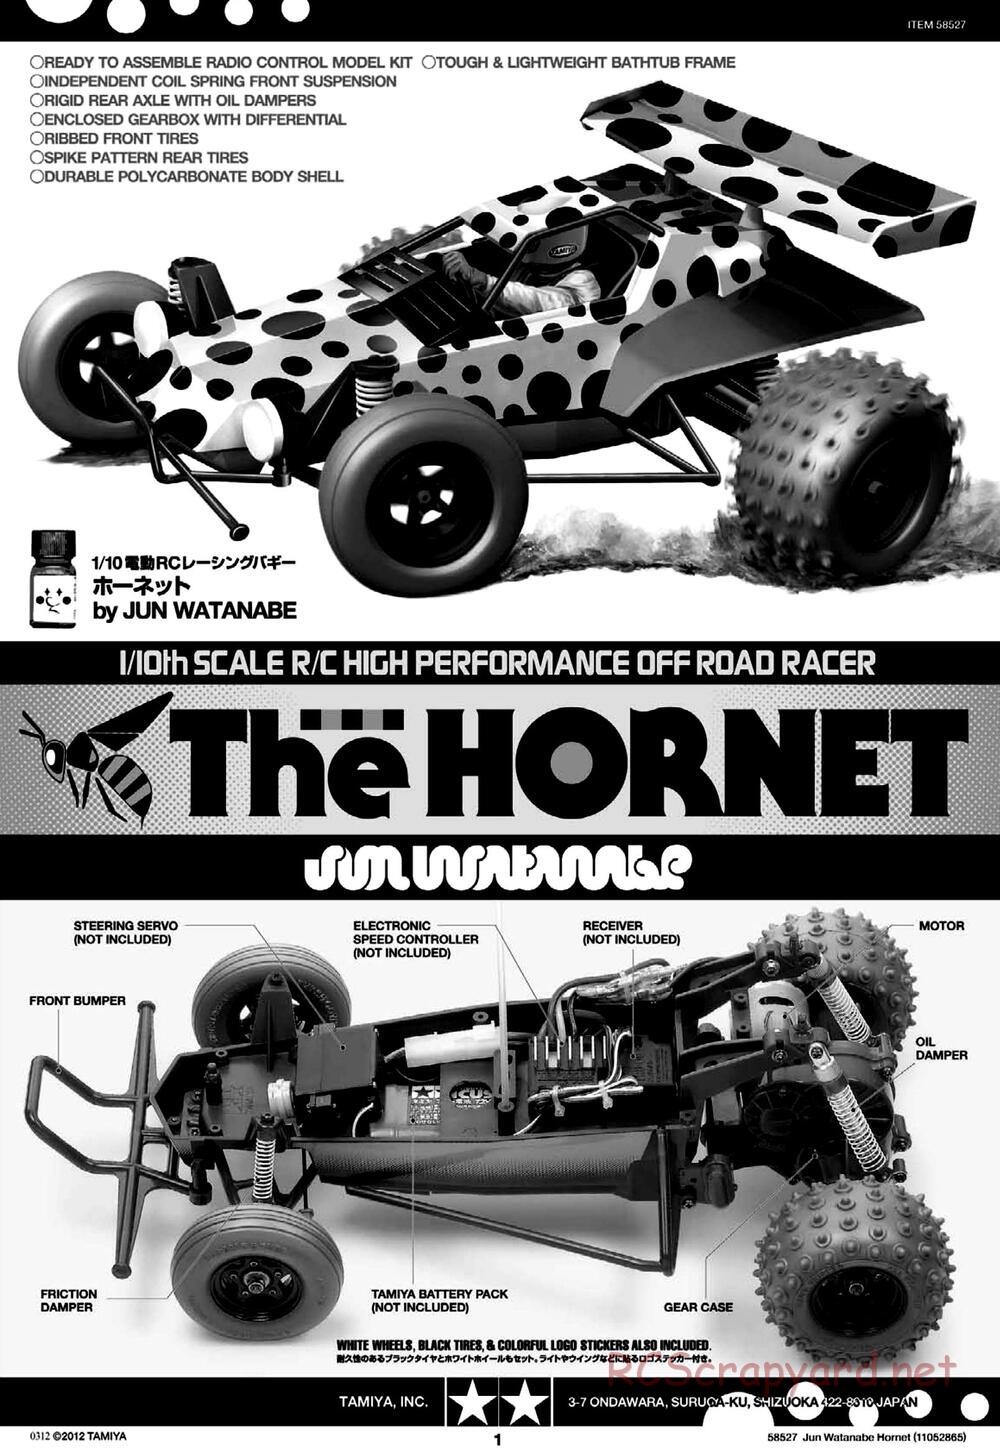 Tamiya - The Hornet by Jun Watanabe - GH Chassis - Manual - Page 1